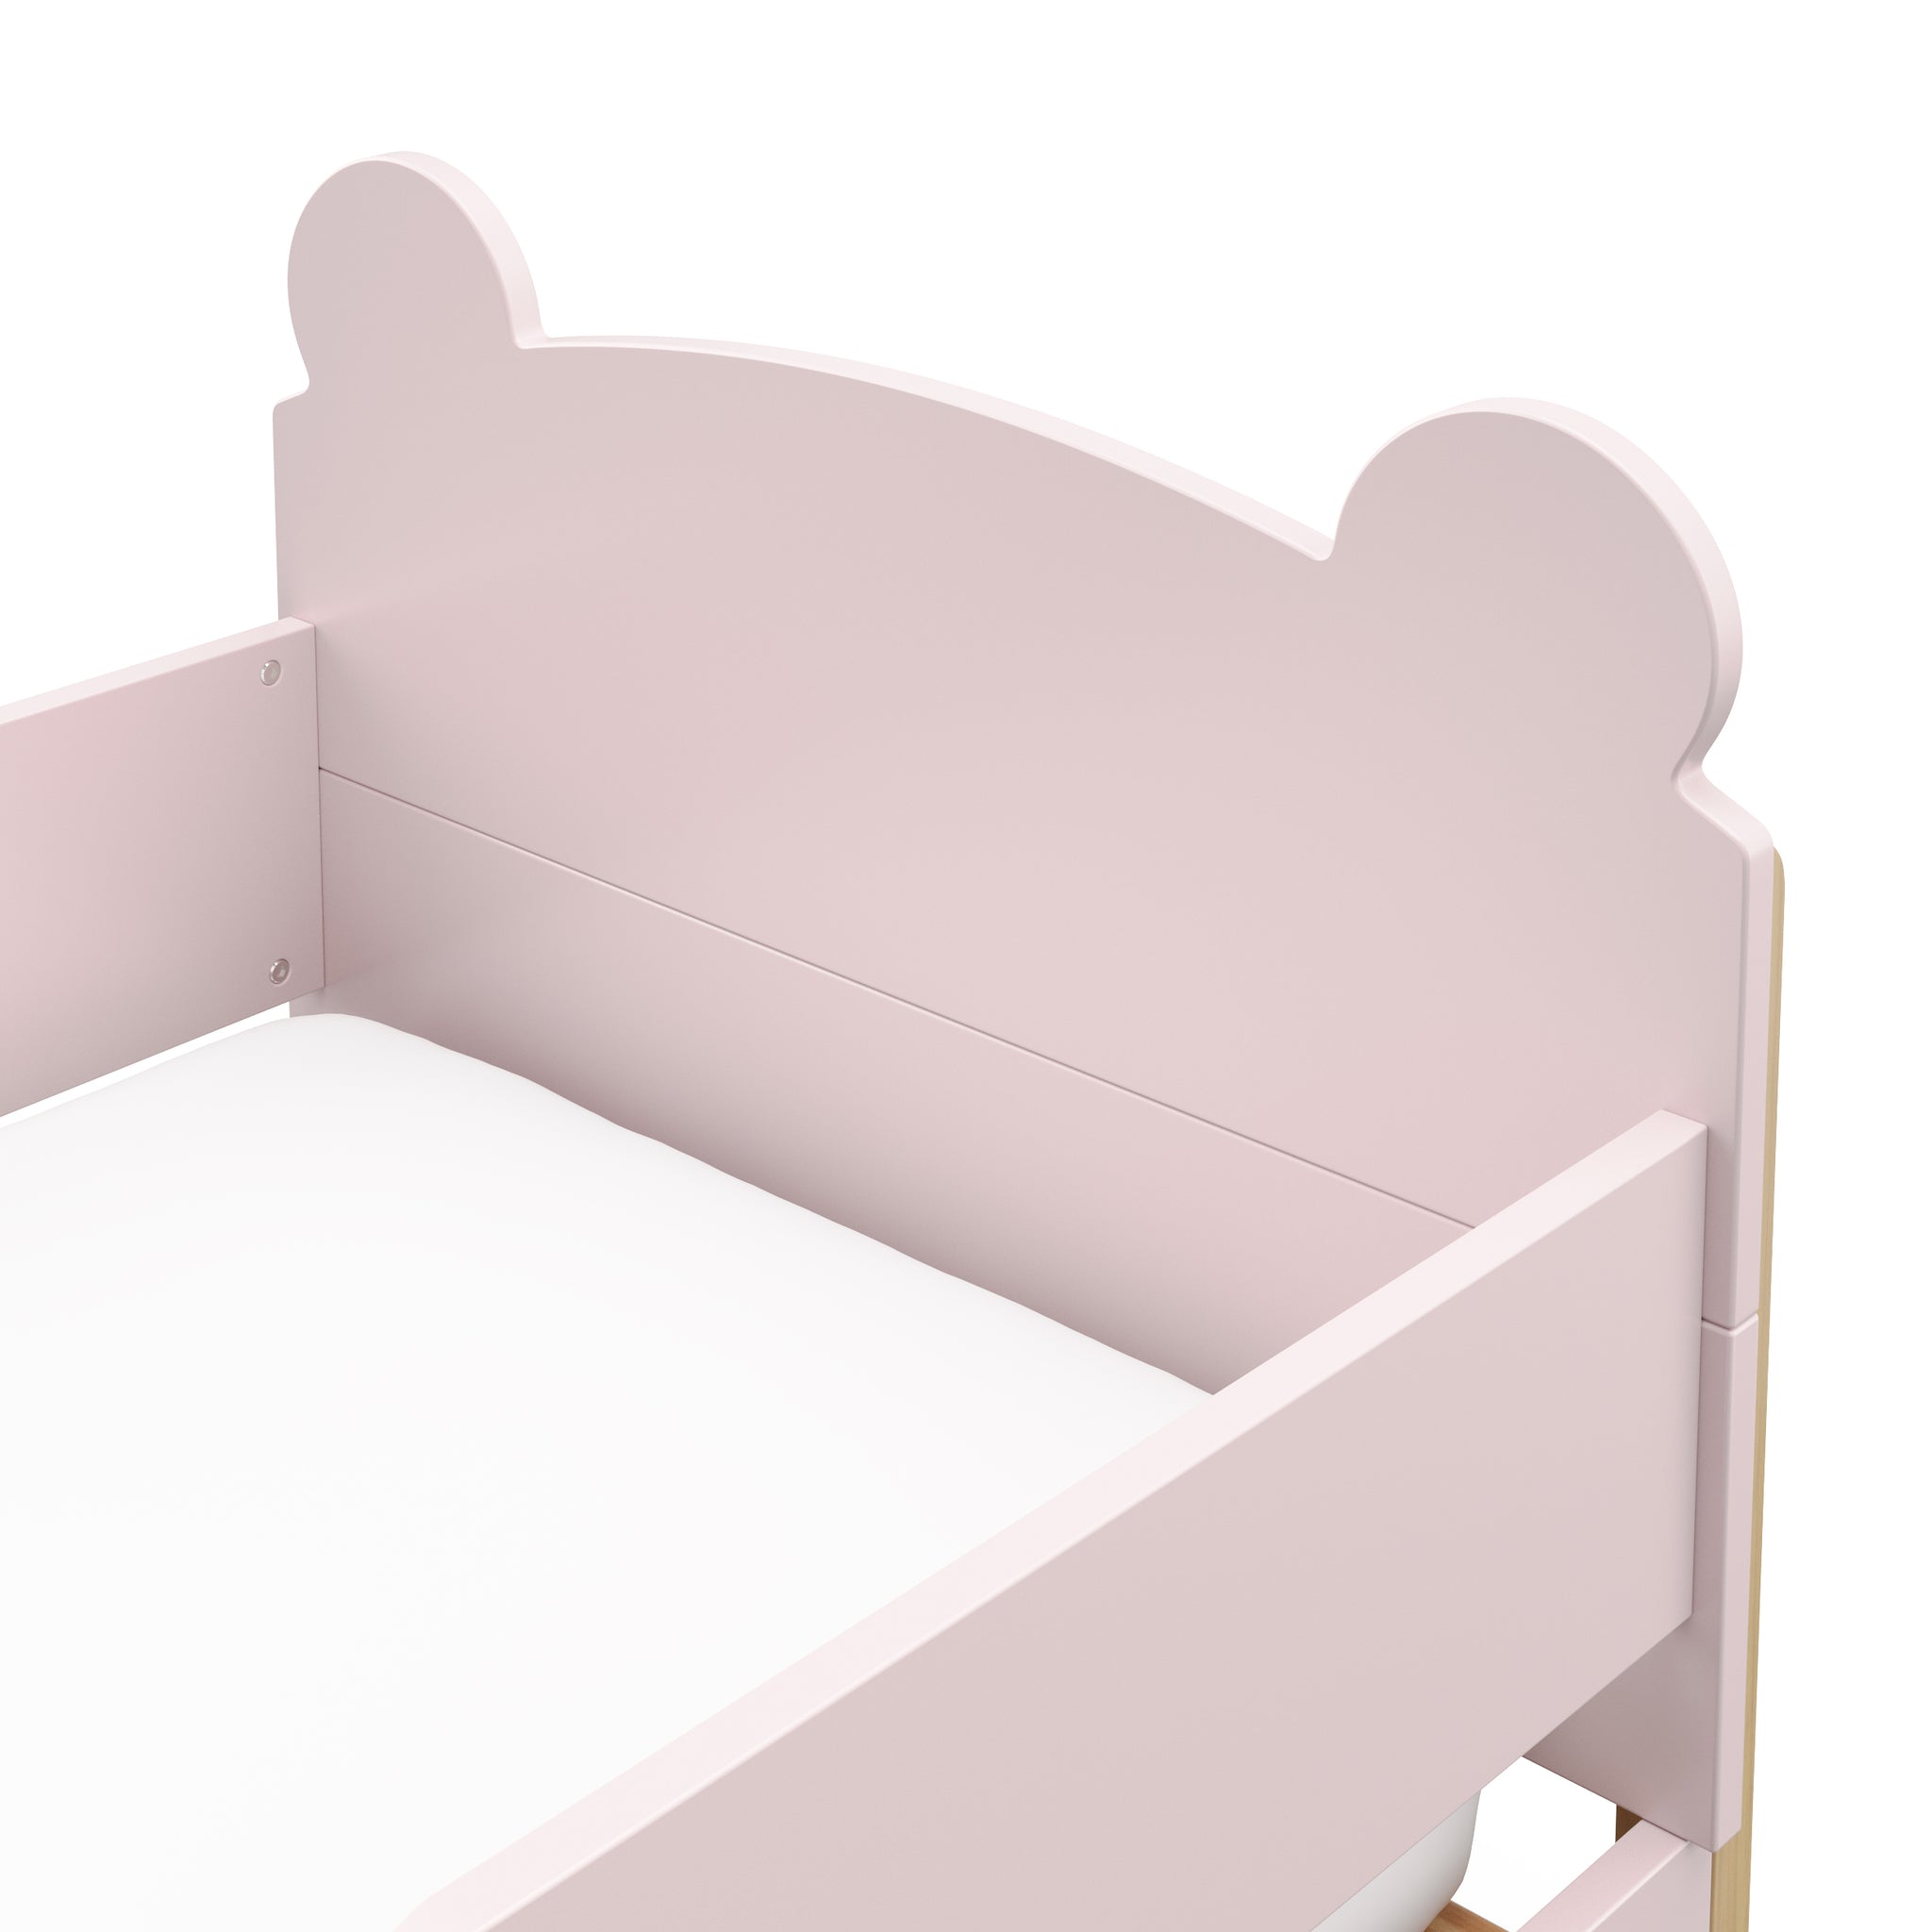 close up view of a blush-colored toddler bed